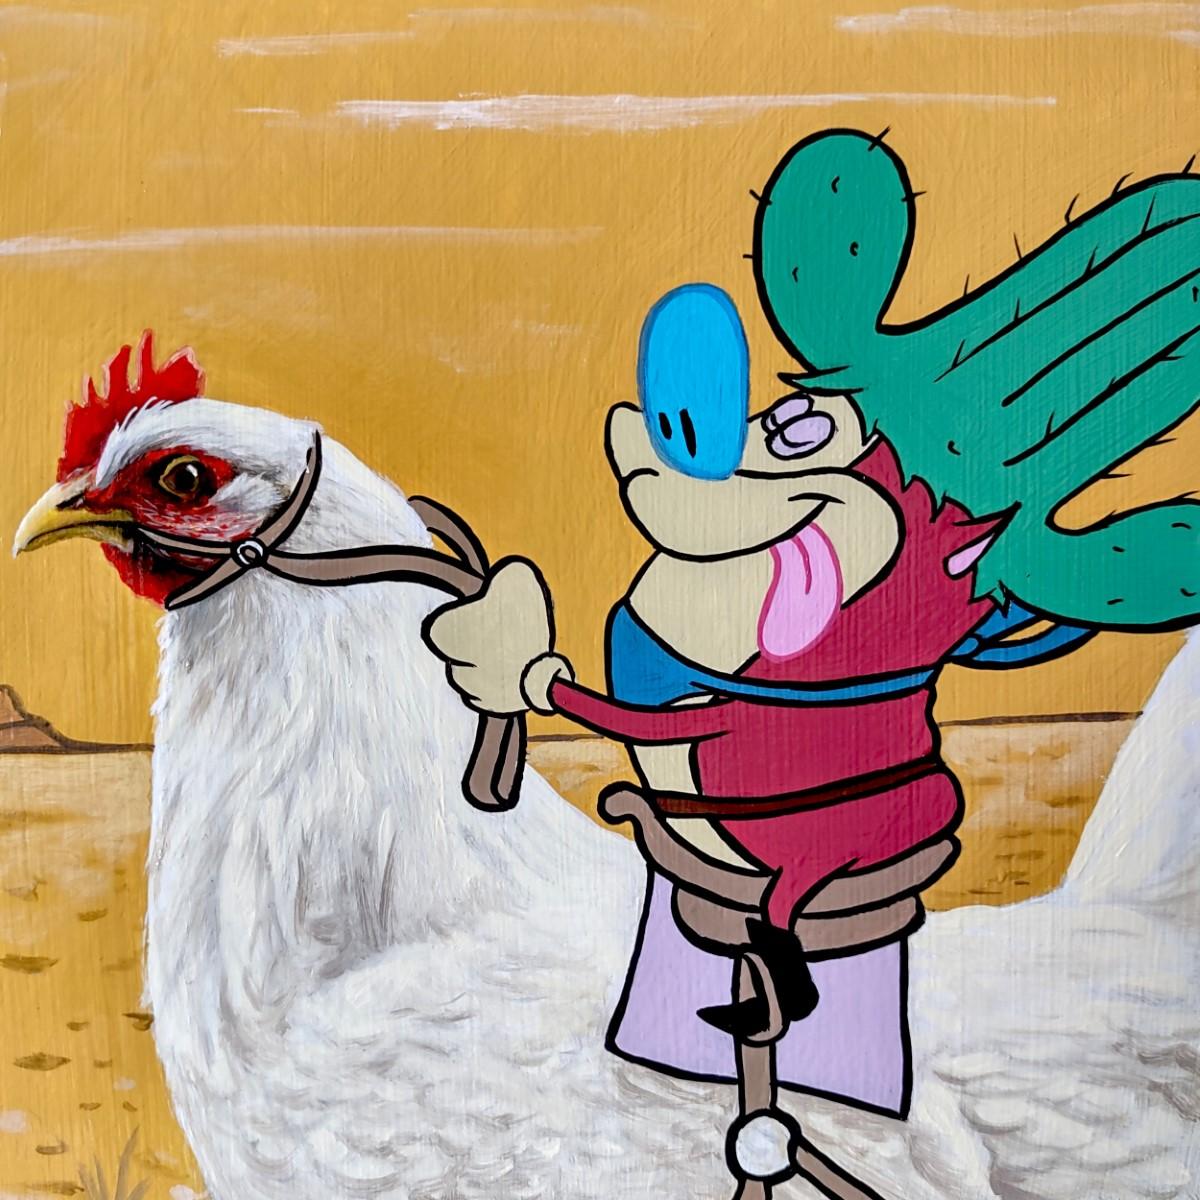 3rd Version (Ben Patterson) Figurative Painting - "Stupid the Kid", Cartoon Character Riding a Chicken Oil Painting